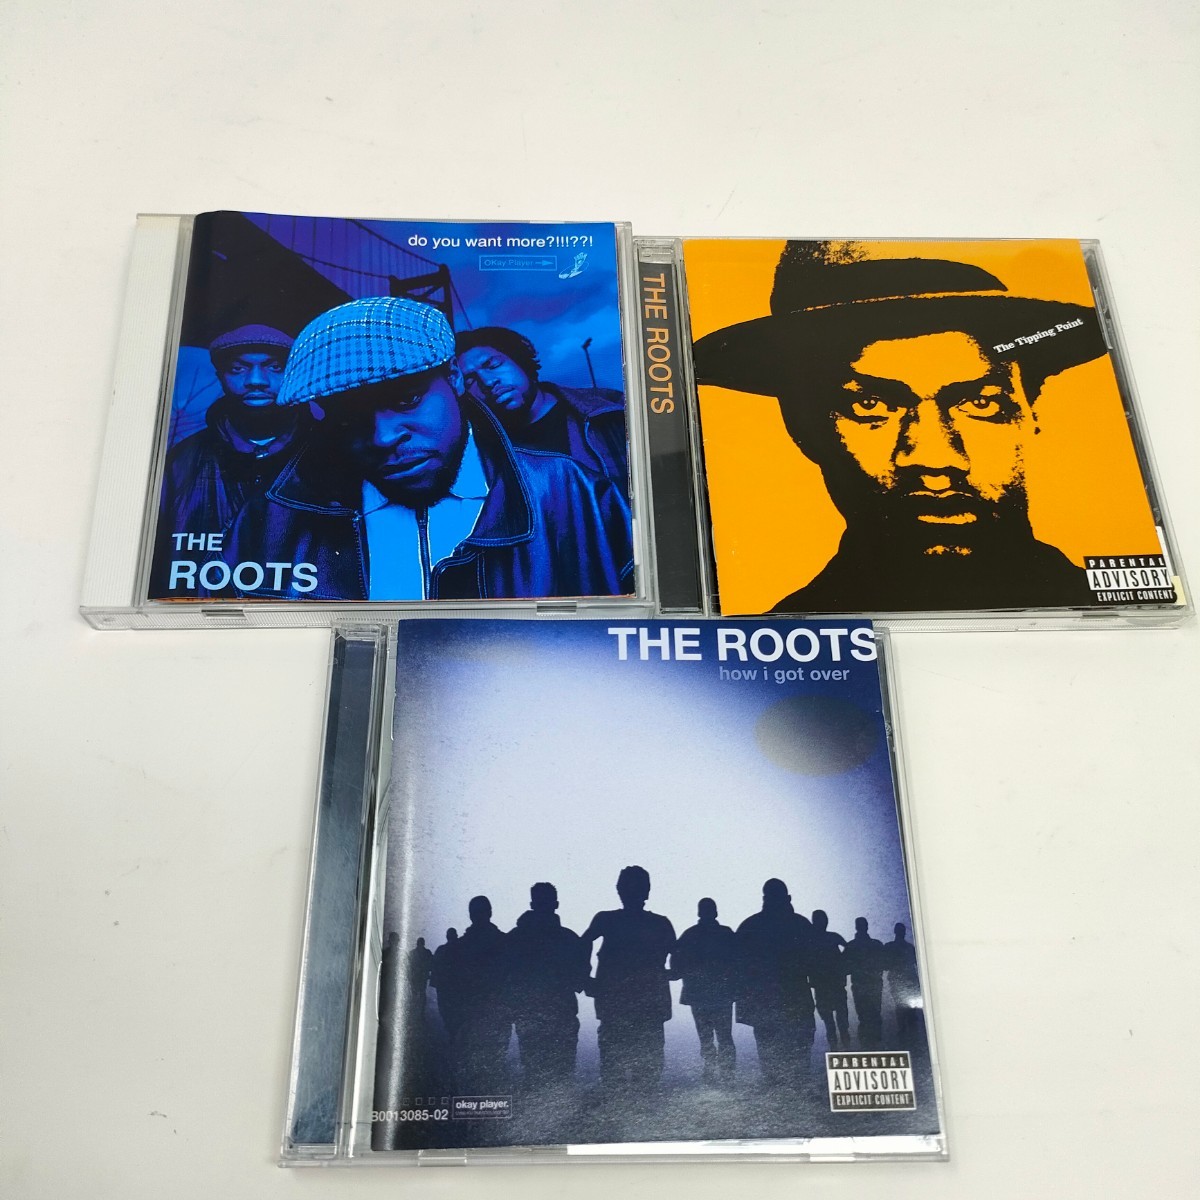 CD THE ROOTS ザ・ルーツ　3枚セット　do yovu want more? / how I got over / tipping point レンタル落ち　即決　送料込み_画像1